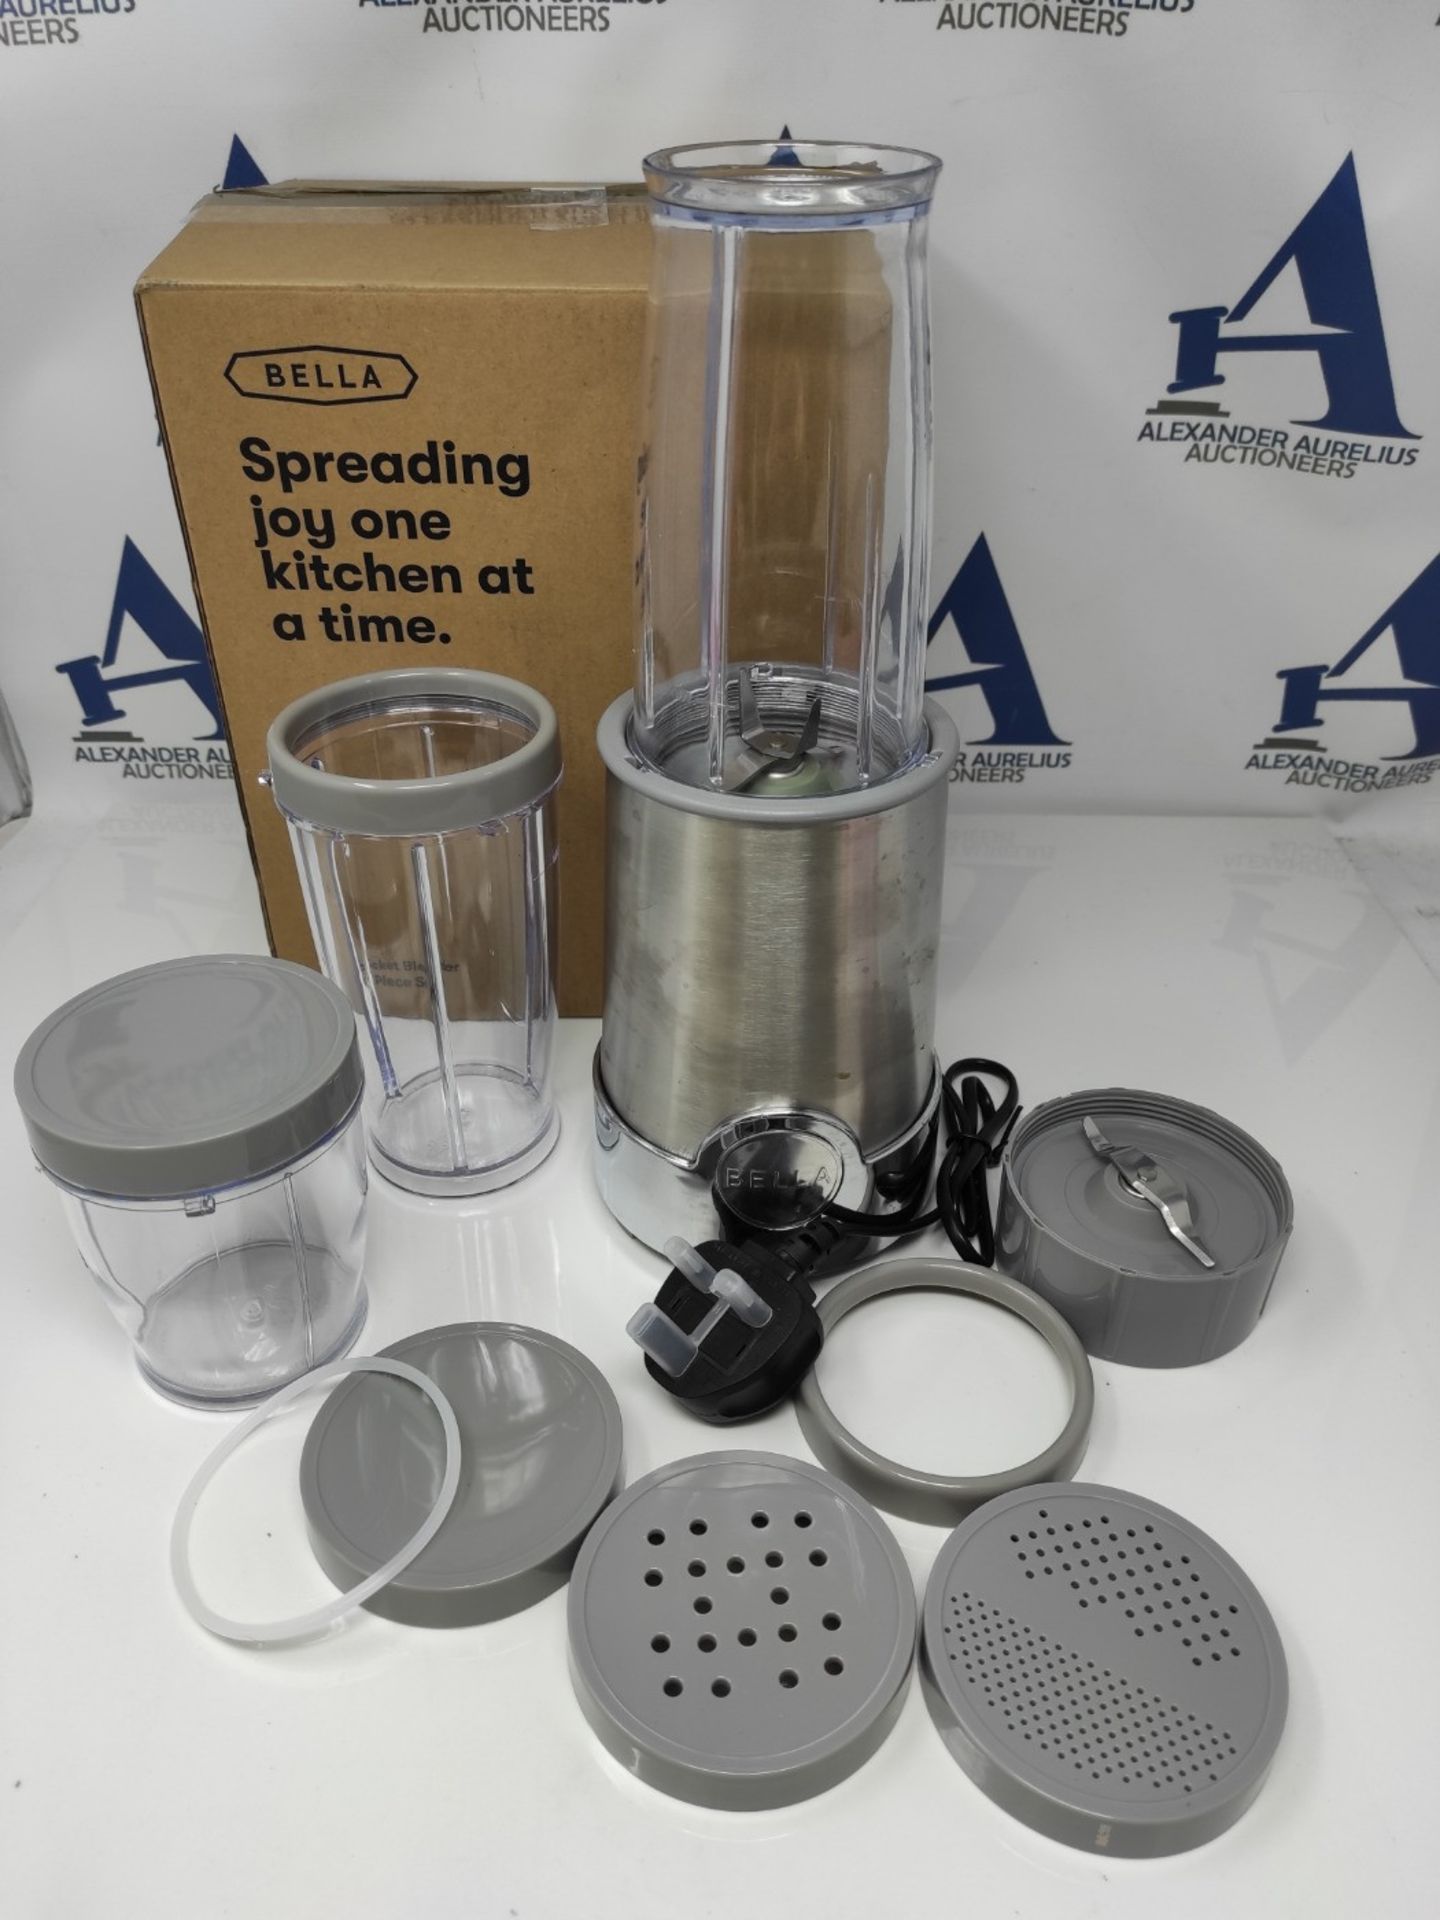 BELLA Personal Size Rocket Blender, Optimal for Smoothies, Shakes and Healthy Drinks, - Bild 2 aus 2